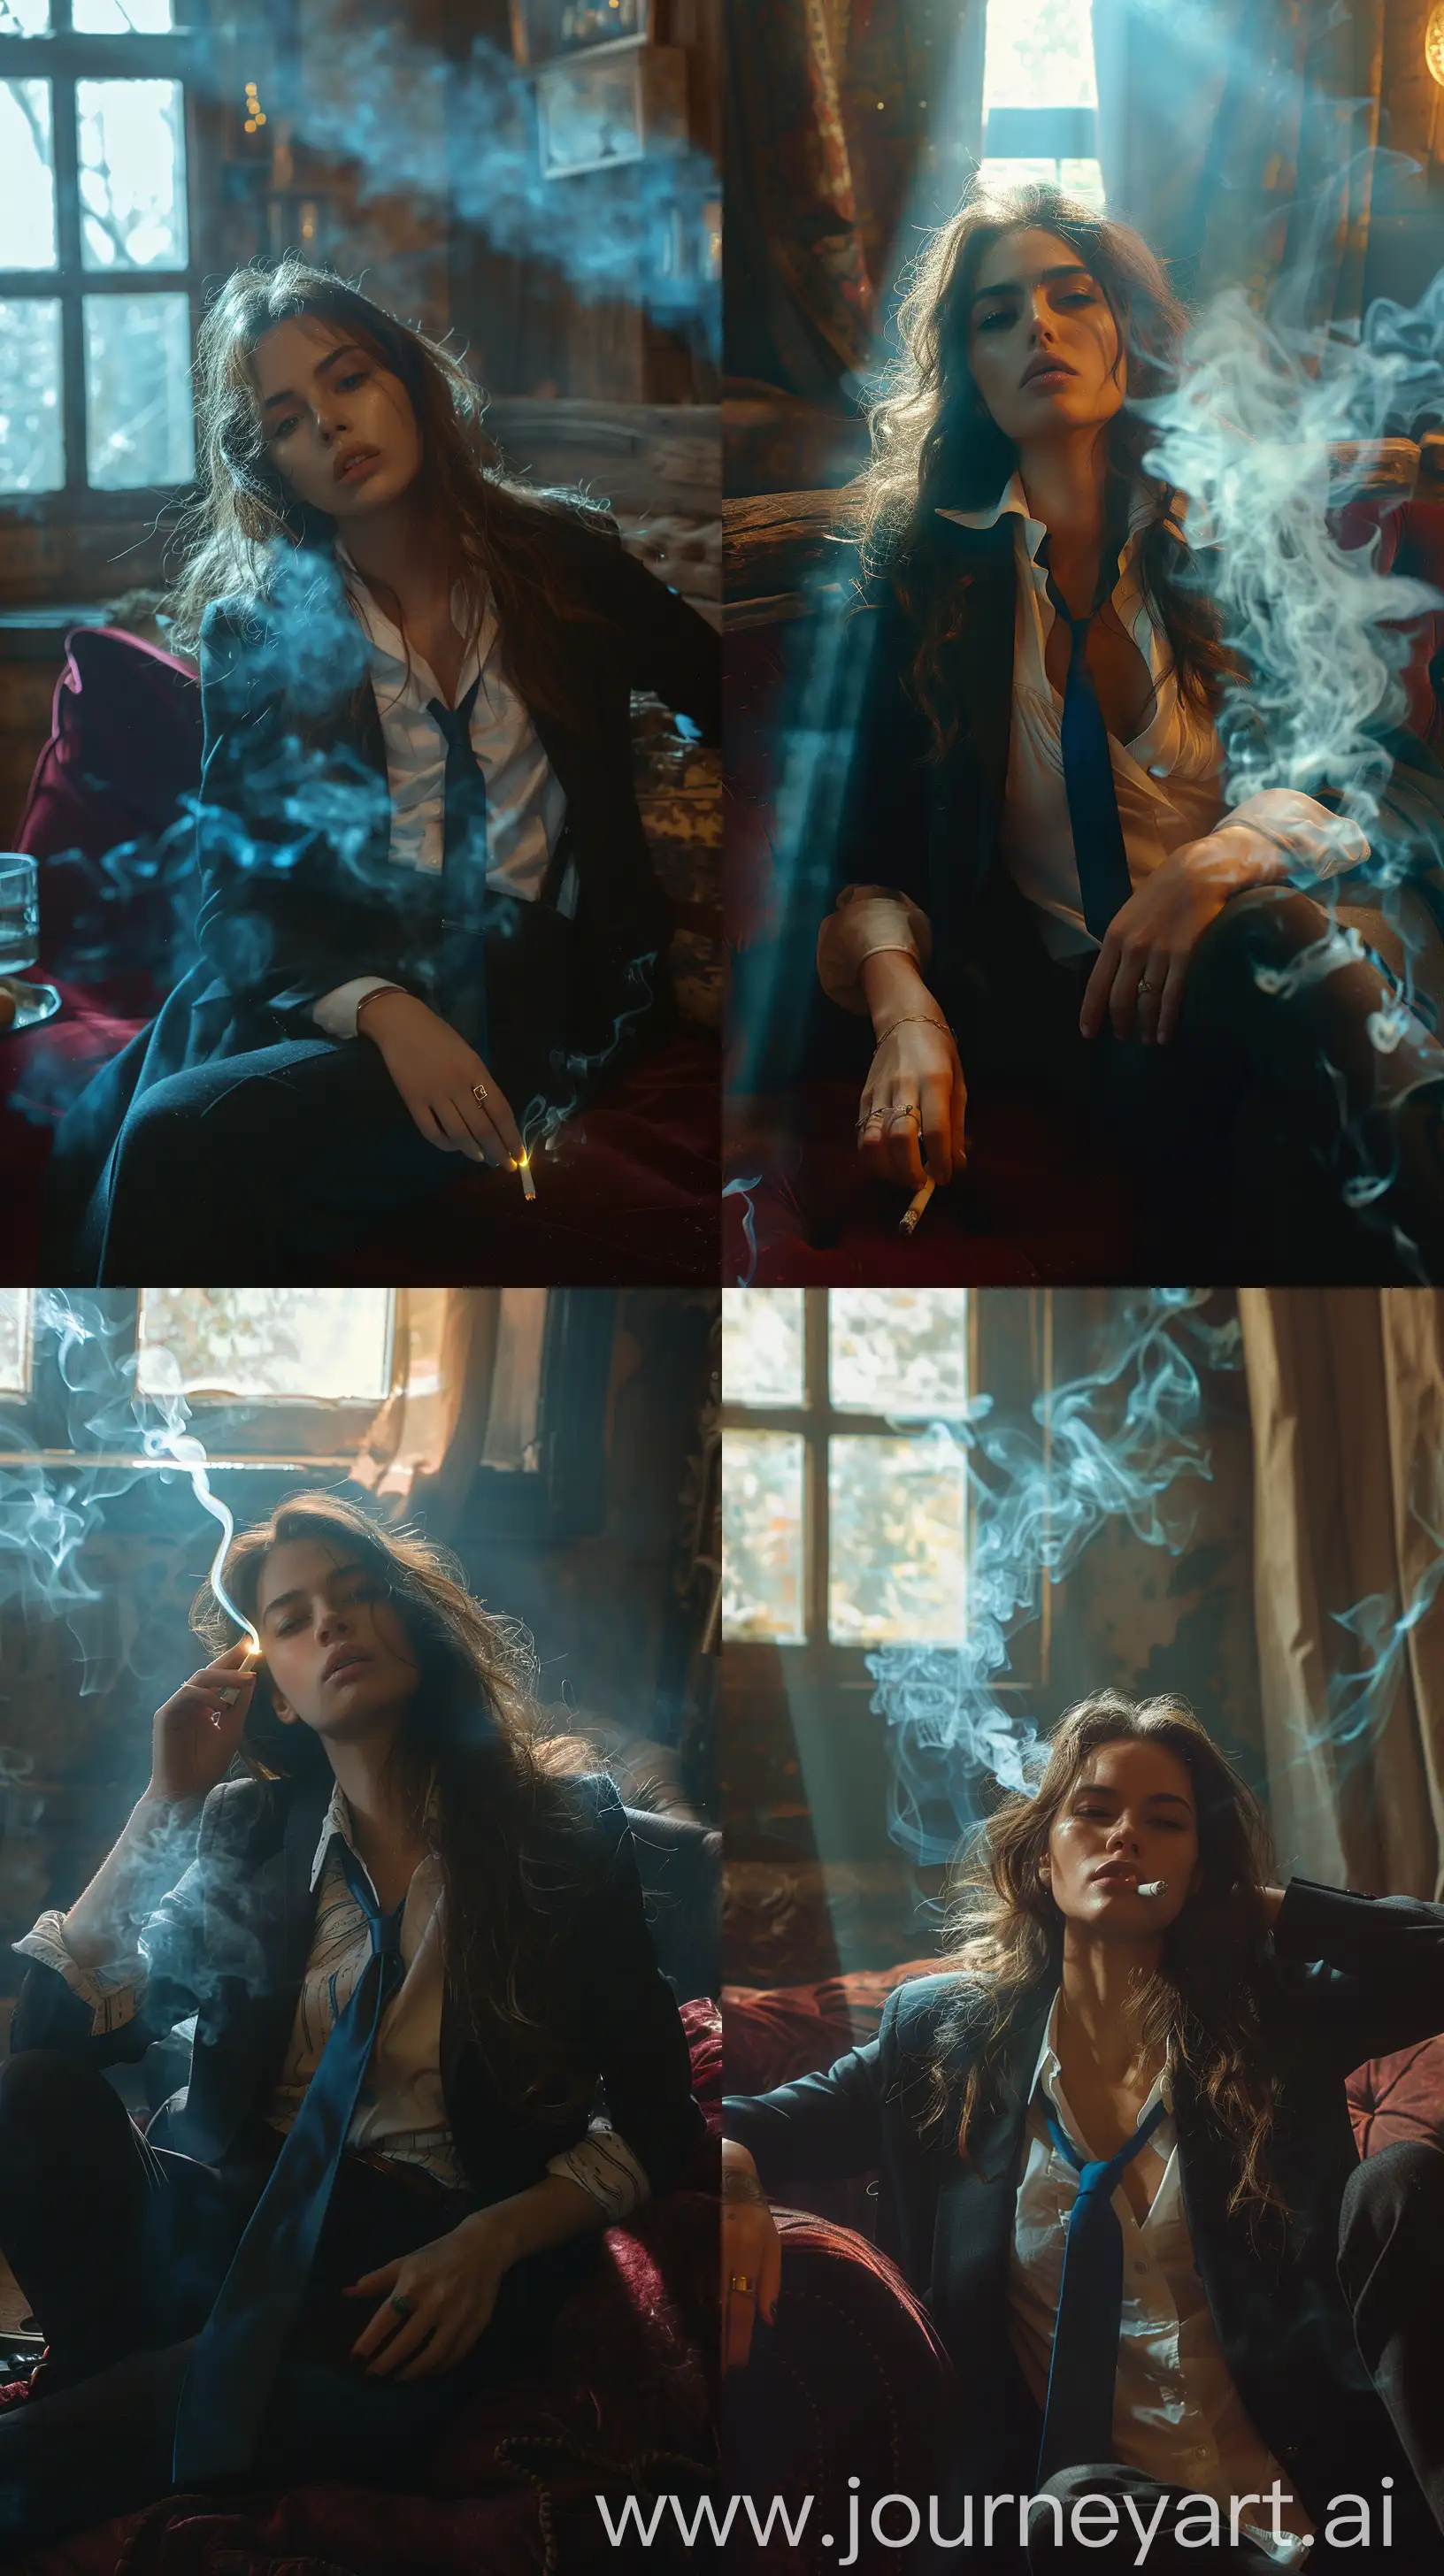 Mysterious-Woman-in-Crimson-Lounge-with-Hazy-Smoke